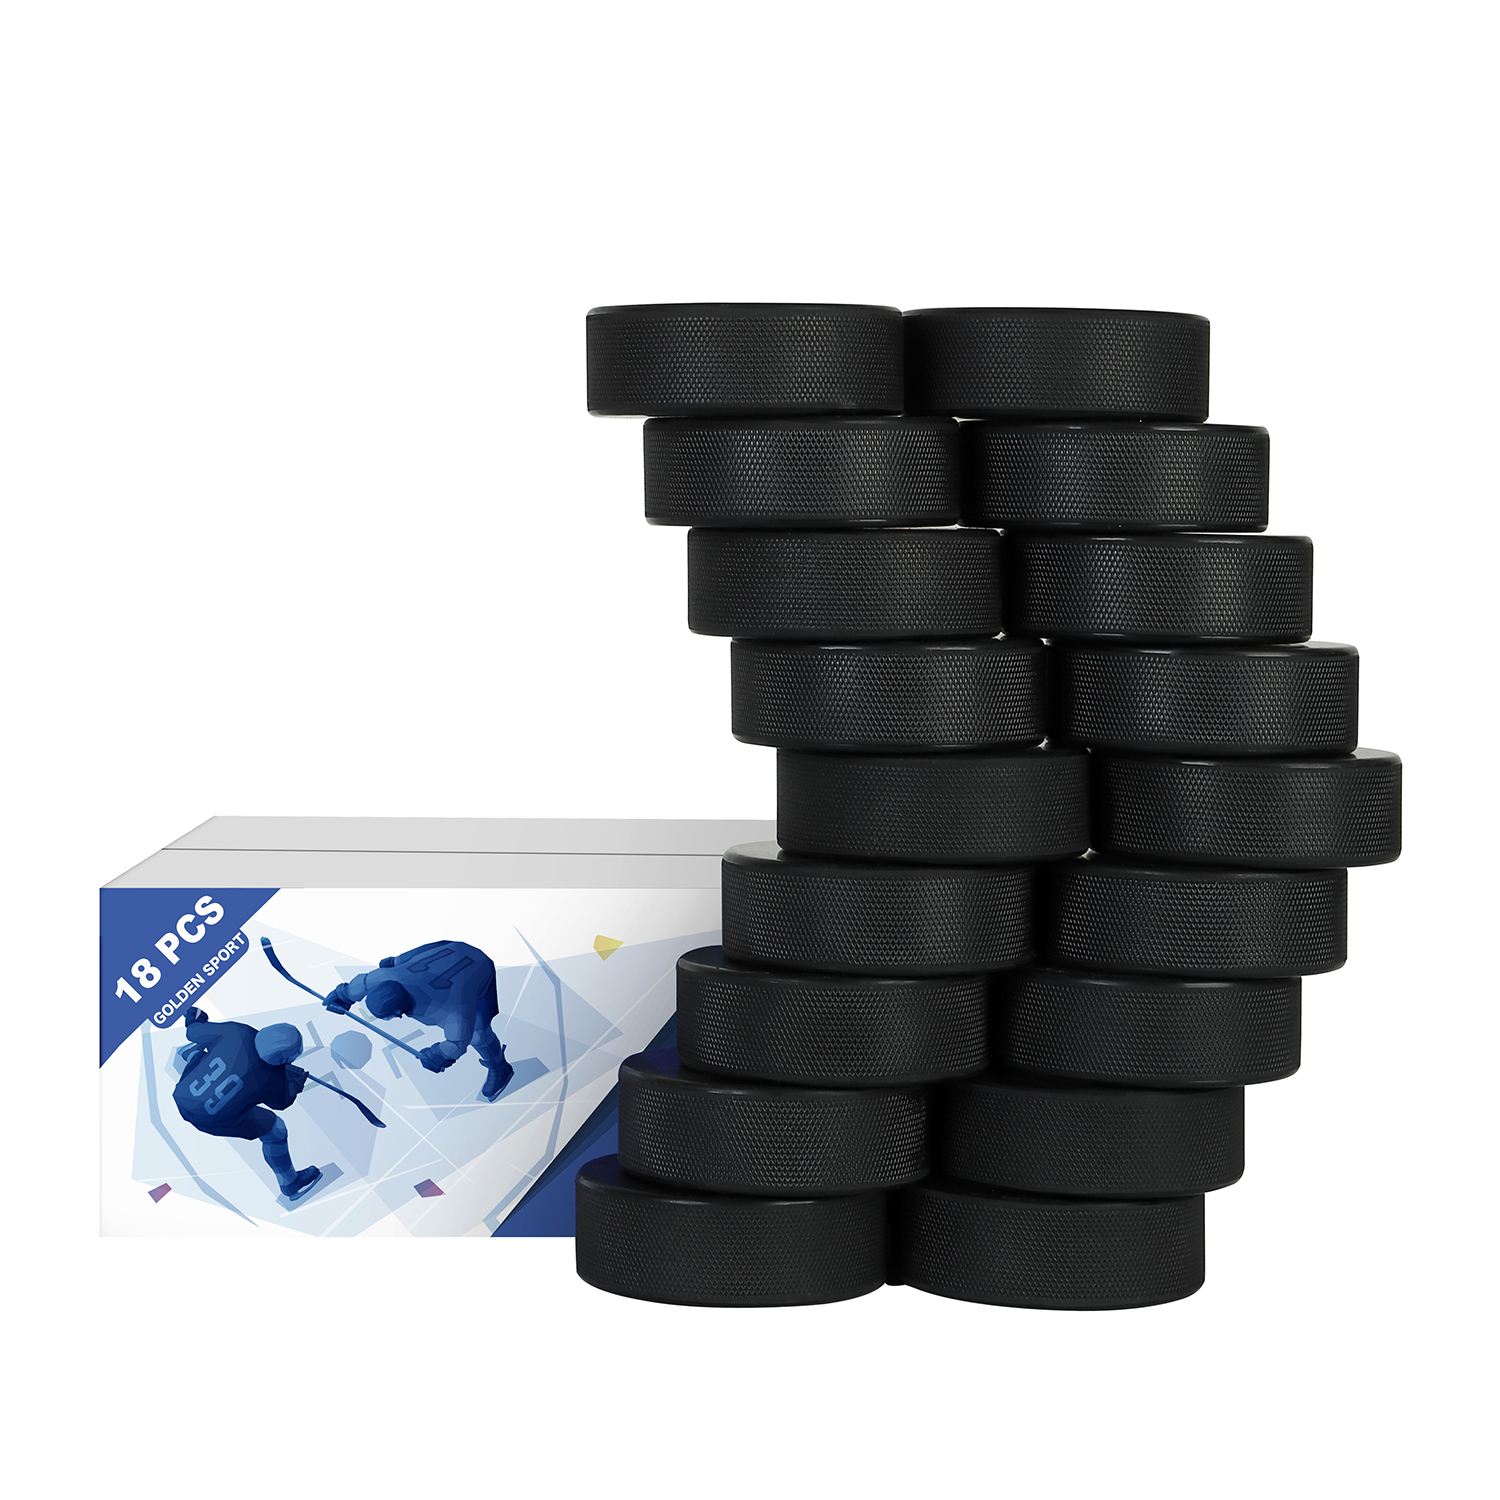 Official Regulation 6oz Diameter 3 Thickness 1 Black Set of 1 Ice Hockey Pucks for Practicing and Classic Training 